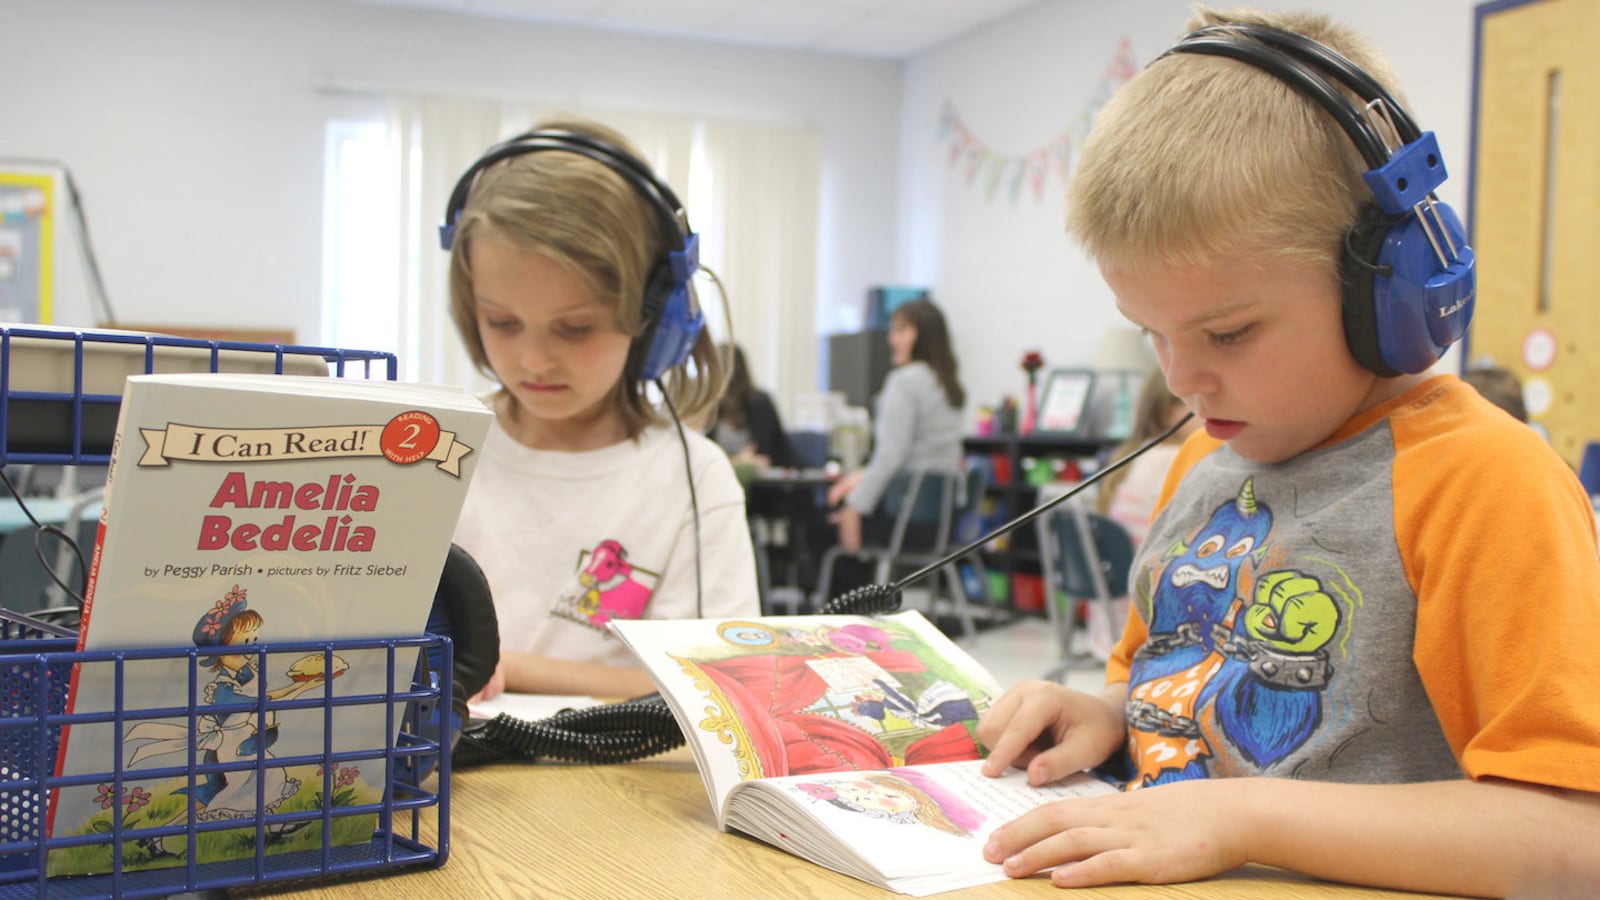 Students read in a classroom in Tennessee, now in its fourth year of Read to be Ready, a major literacy initiative started under Gov. Bill Haslam's administration and now in jeopardy under the administration of Gov. Bill Lee. (Photo courtesy of Tennessee Department of Education)